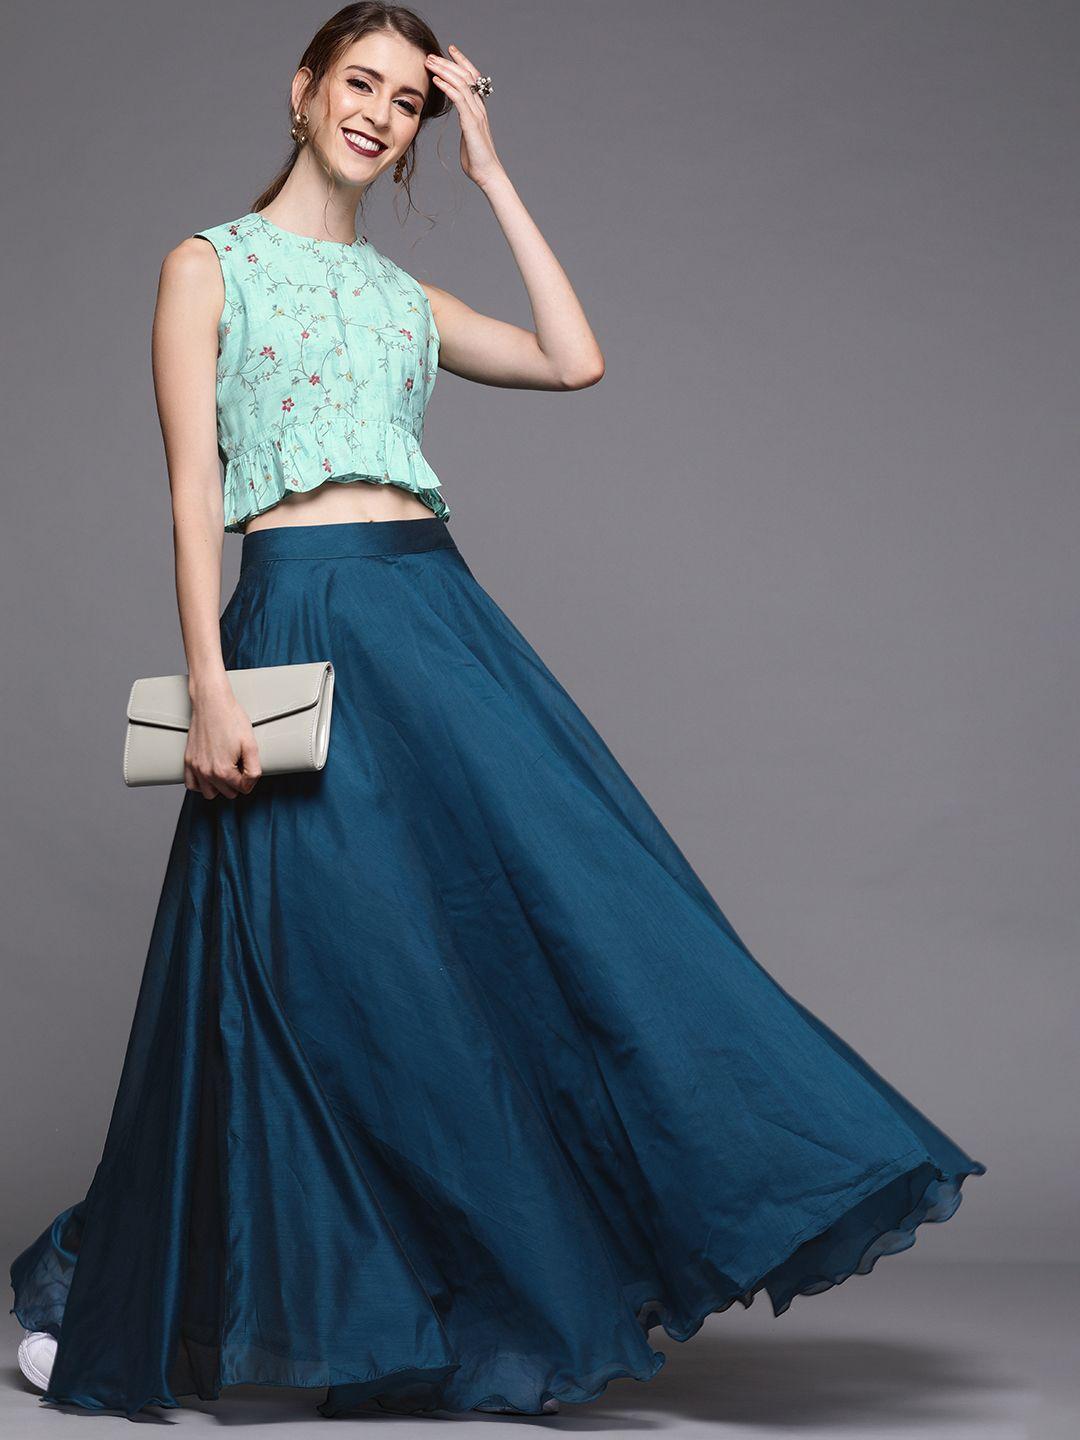 inddus sea green & teal blue embroidered crop top with skirt